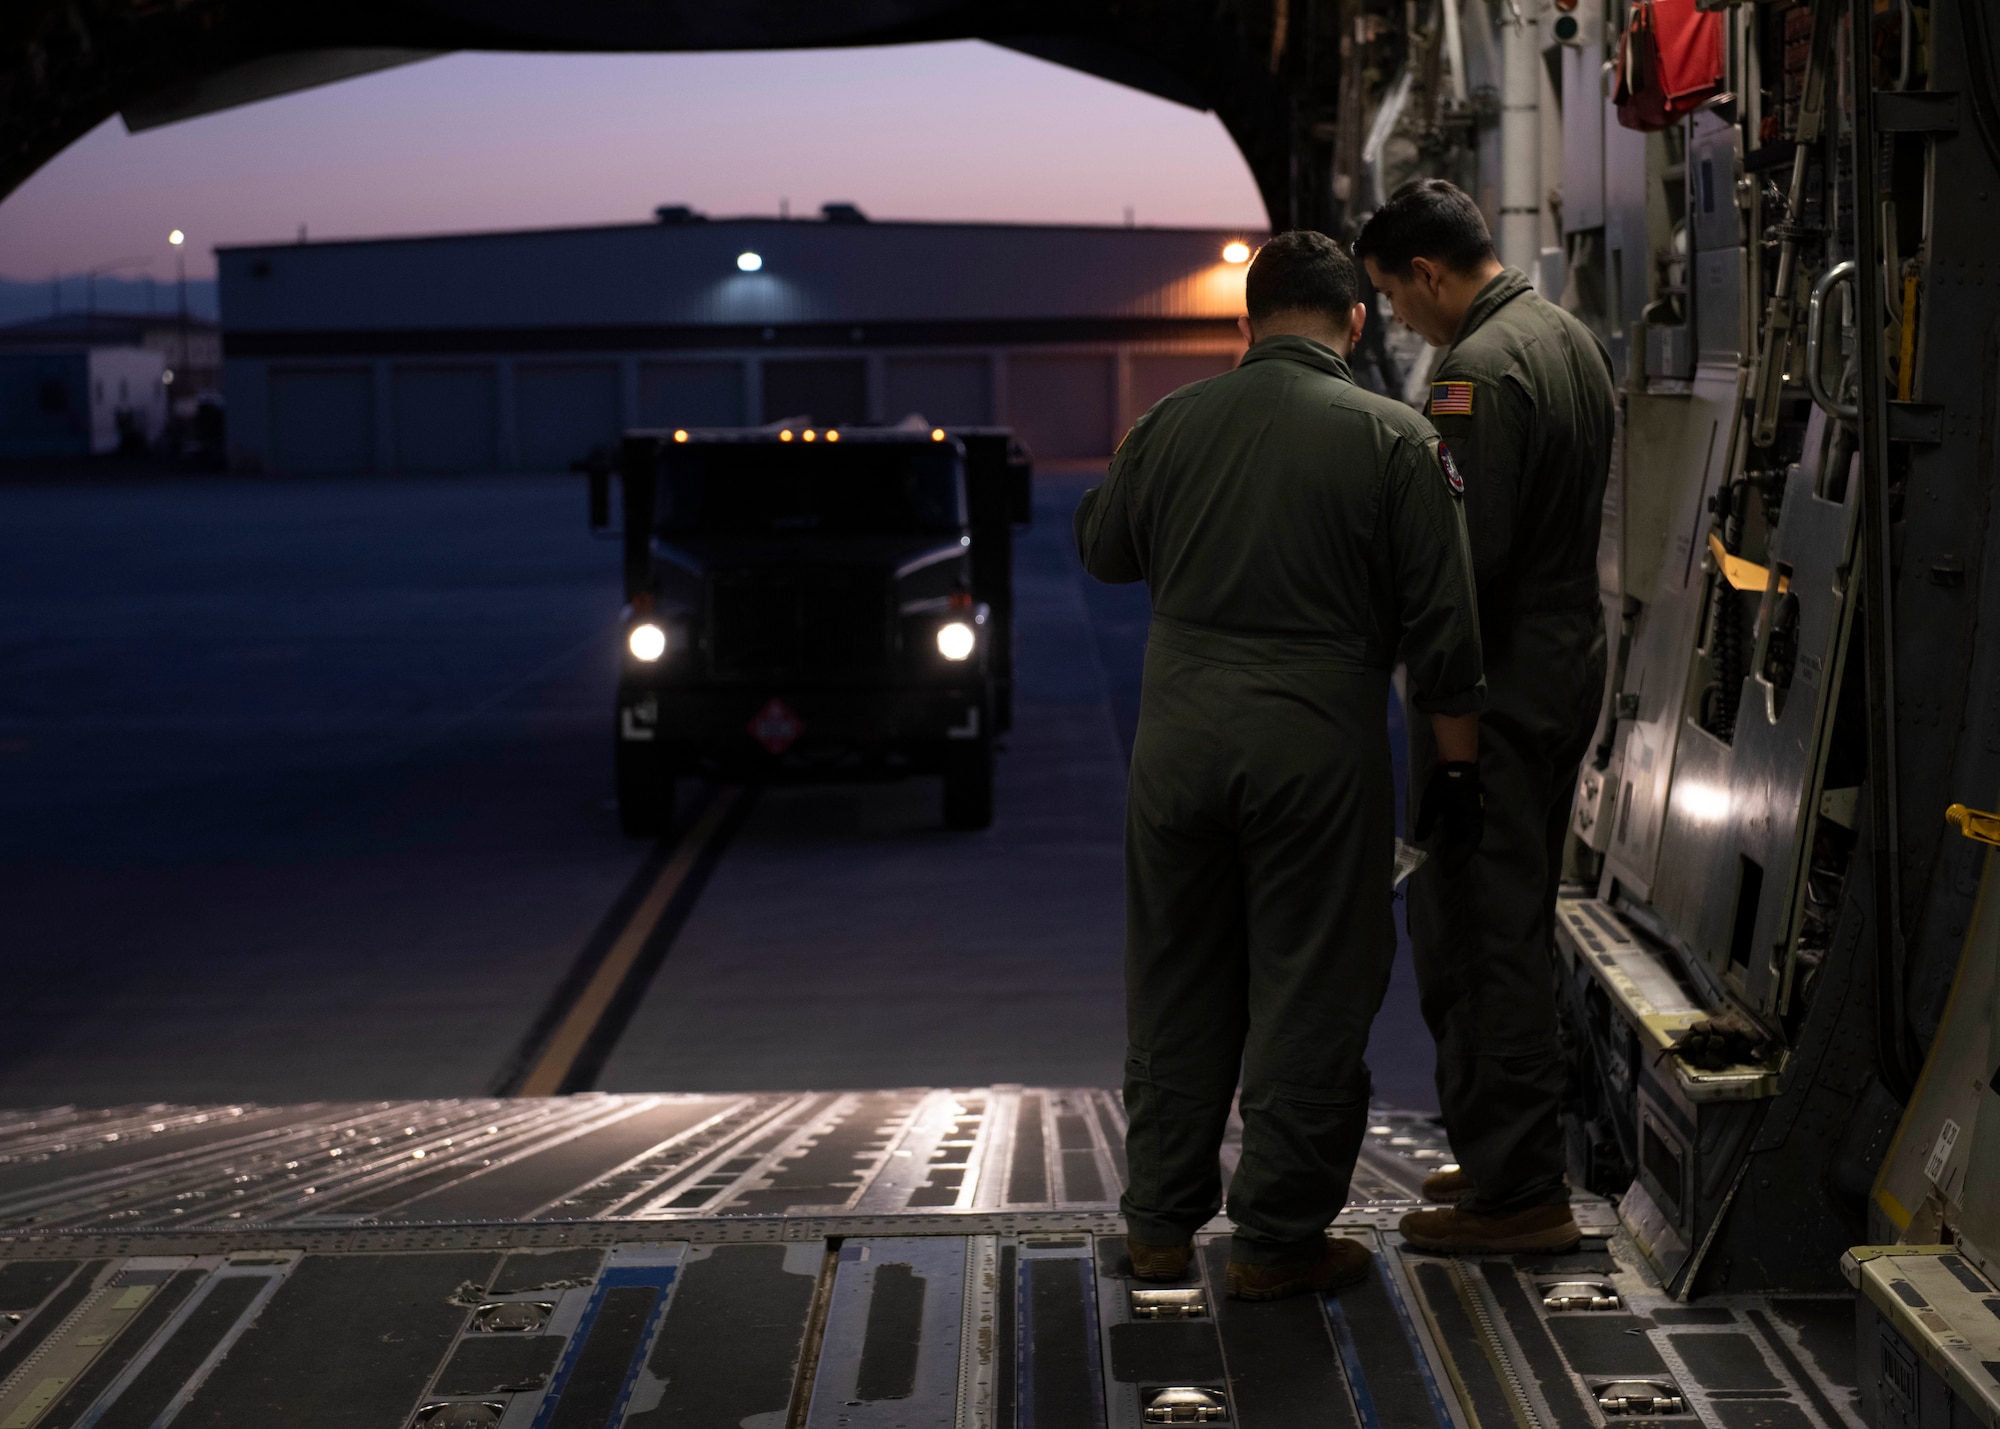 U.S. Air Force Staff Sgt. Michale Herrera, left, and Staff Sgt. Alonso Carrillo, both loadmasters with the 4th Airlift Squadron, prepare to load a fuel truck onto a C-17 Globemaster aircraft during Exercise Rainier War 22B at Mountain Home Air Force Base, Idaho, Oct. 18, 2022. Exercise Rainier War is the 62d Airlift Wing’s most expansive exercise, where they deploy as the lead wing and provide command and control and airlift capabilities like airdrop and airland. (U.S. Air Force photo by Staff Sgt. Zoe Thacker)